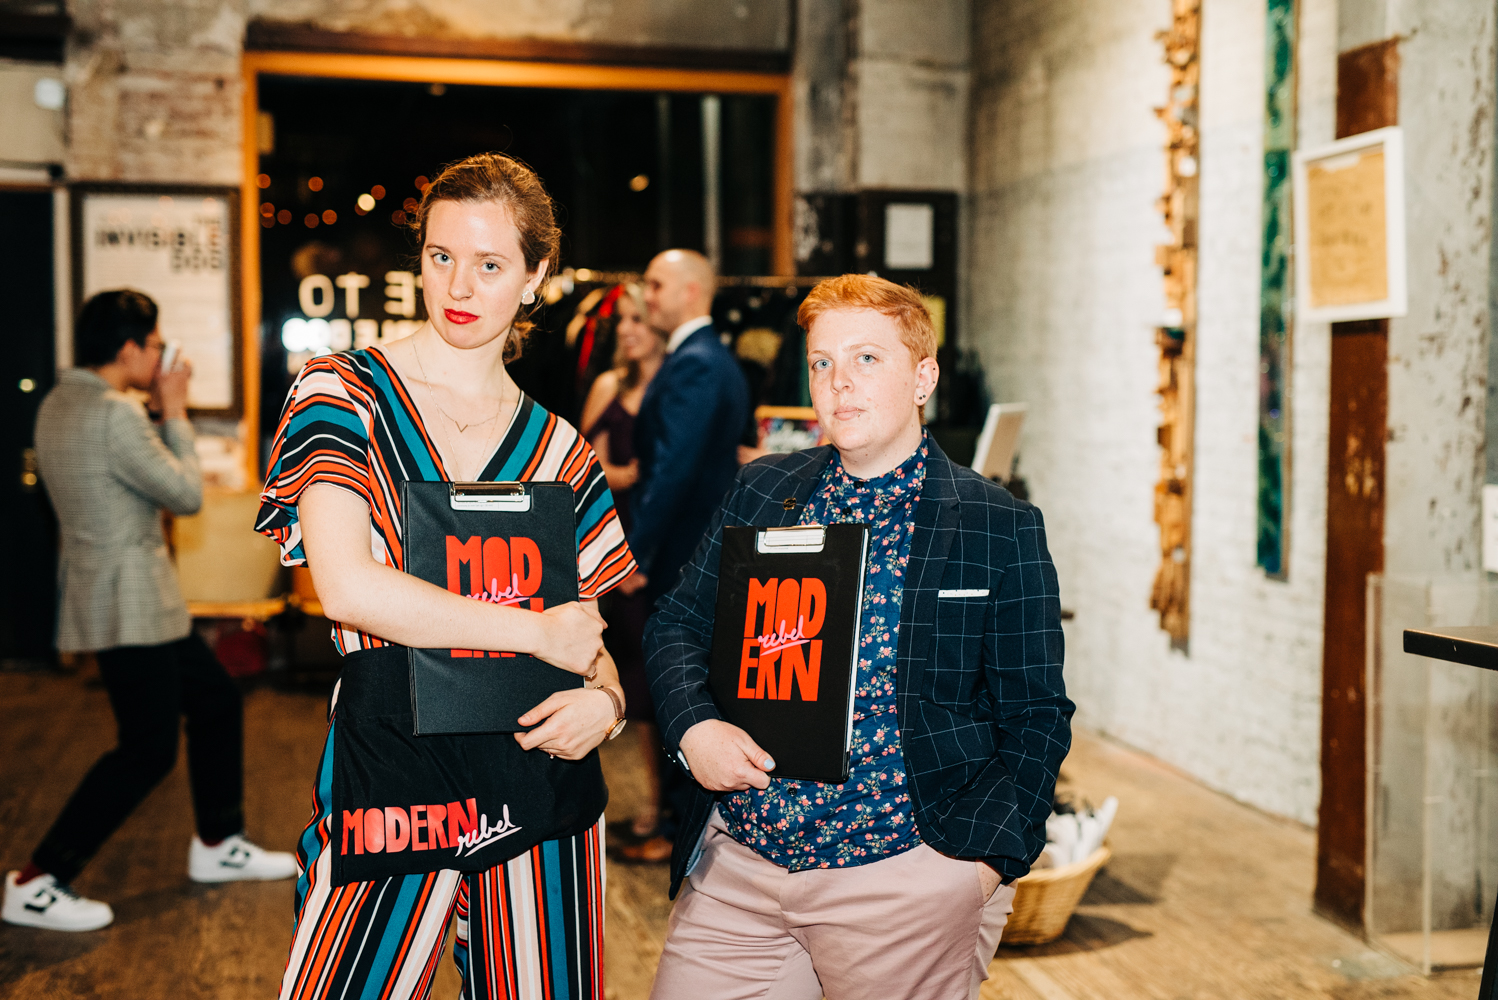 Two white people in fancy outfits stand in a room holding clipboards that say Modern Rebel on them, they are looking at the camera with serious faces.